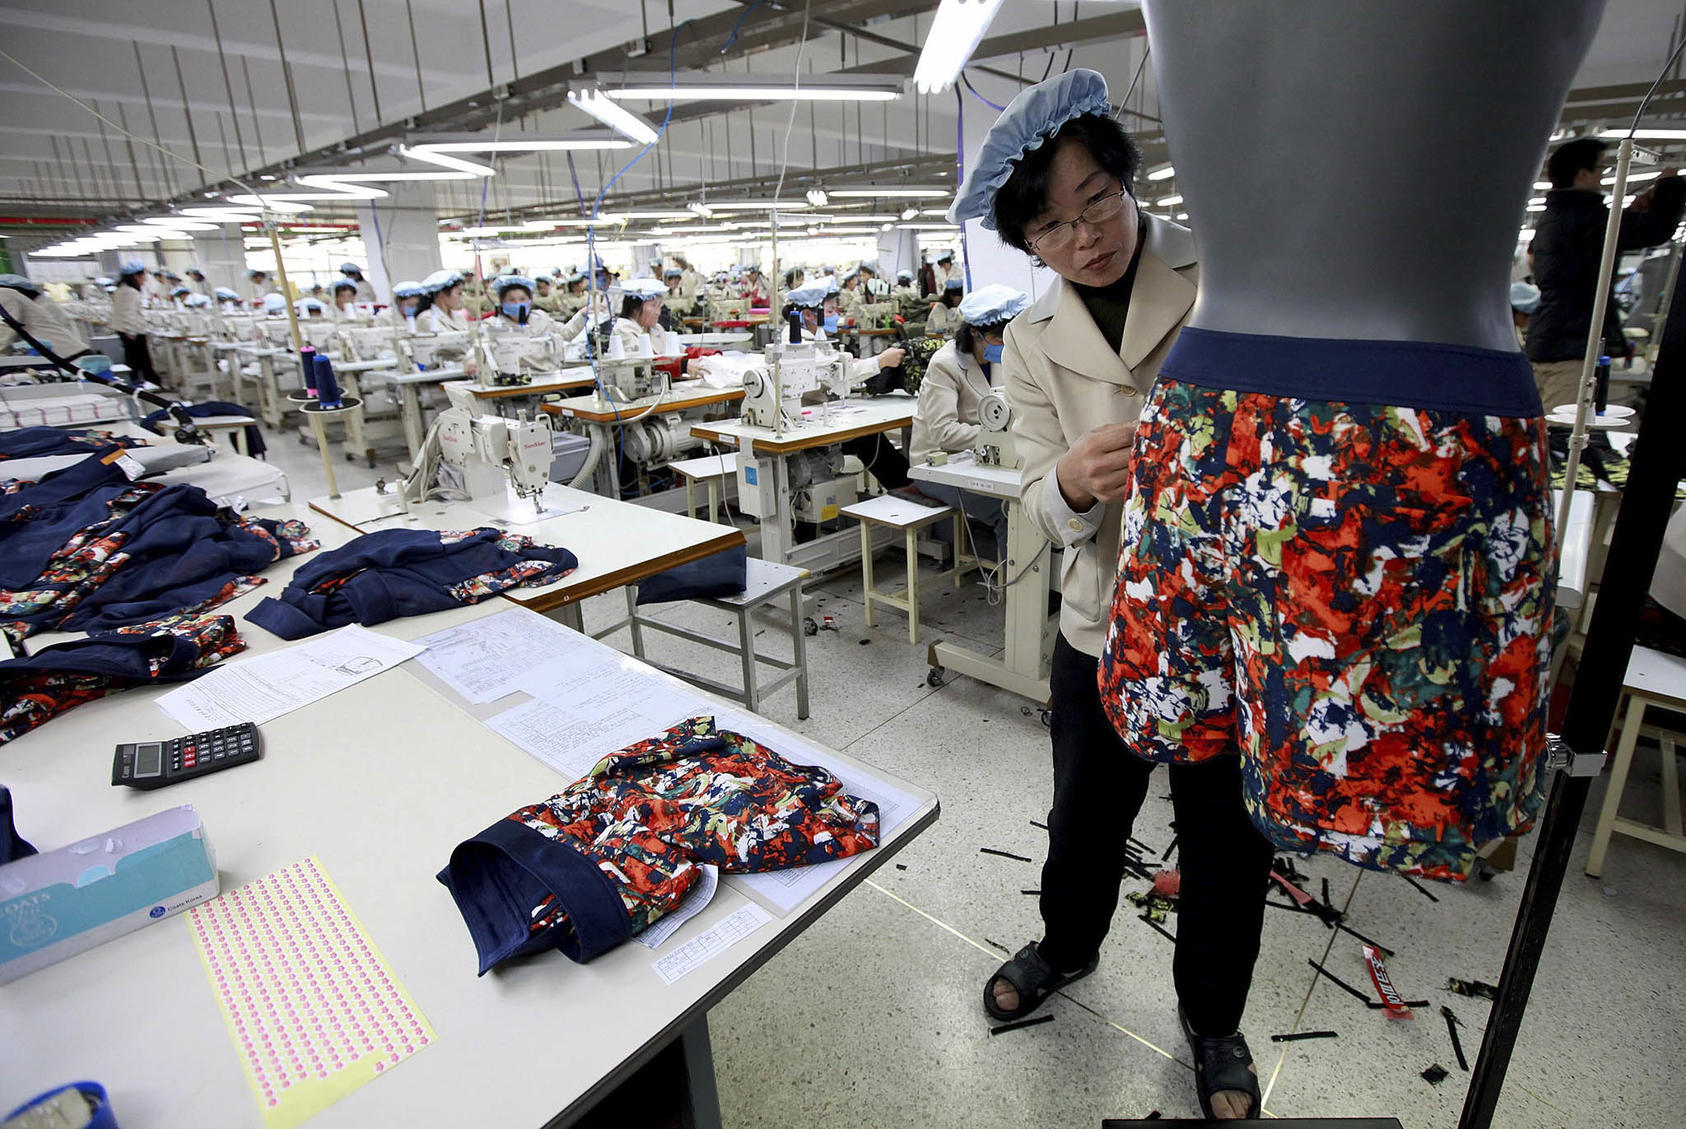 North Korean workers at an apparel factory in the Kaesong industrial park in North Korea on Dec. 19, 2013. South Korea shut down the complex in 2016 in retaliation for North Korea’s rocket launch and nuclear test. (Park Jin-Hee/Pool via The New York Times)